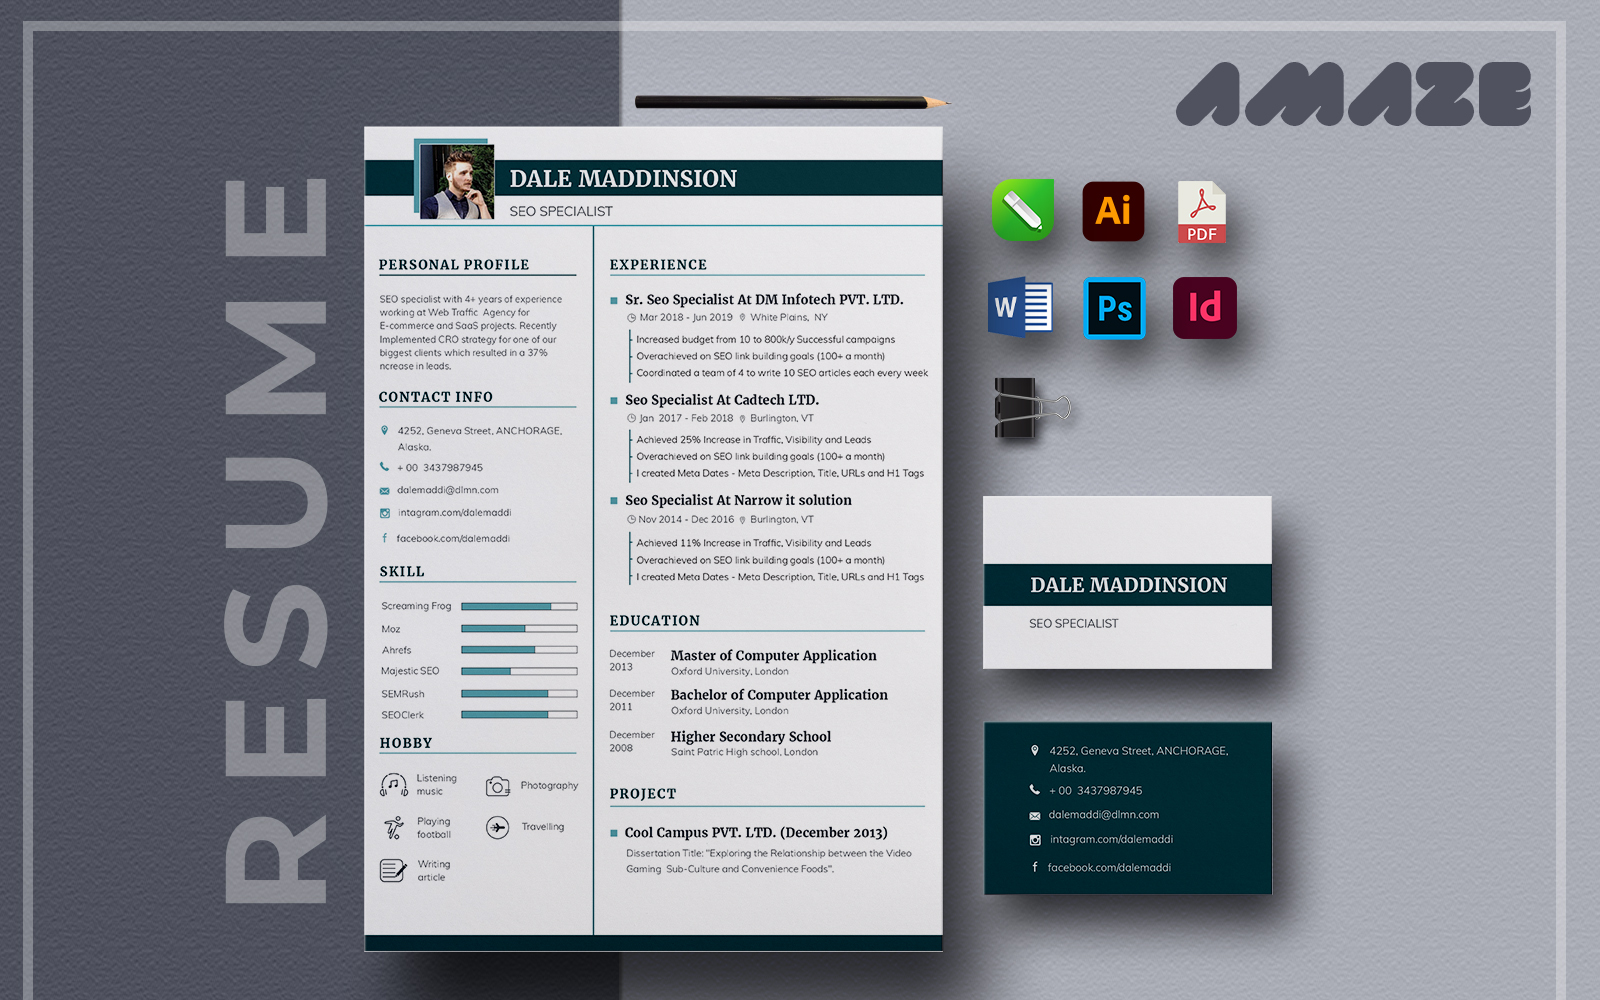 Multipurpose CV and Cover Letter Template